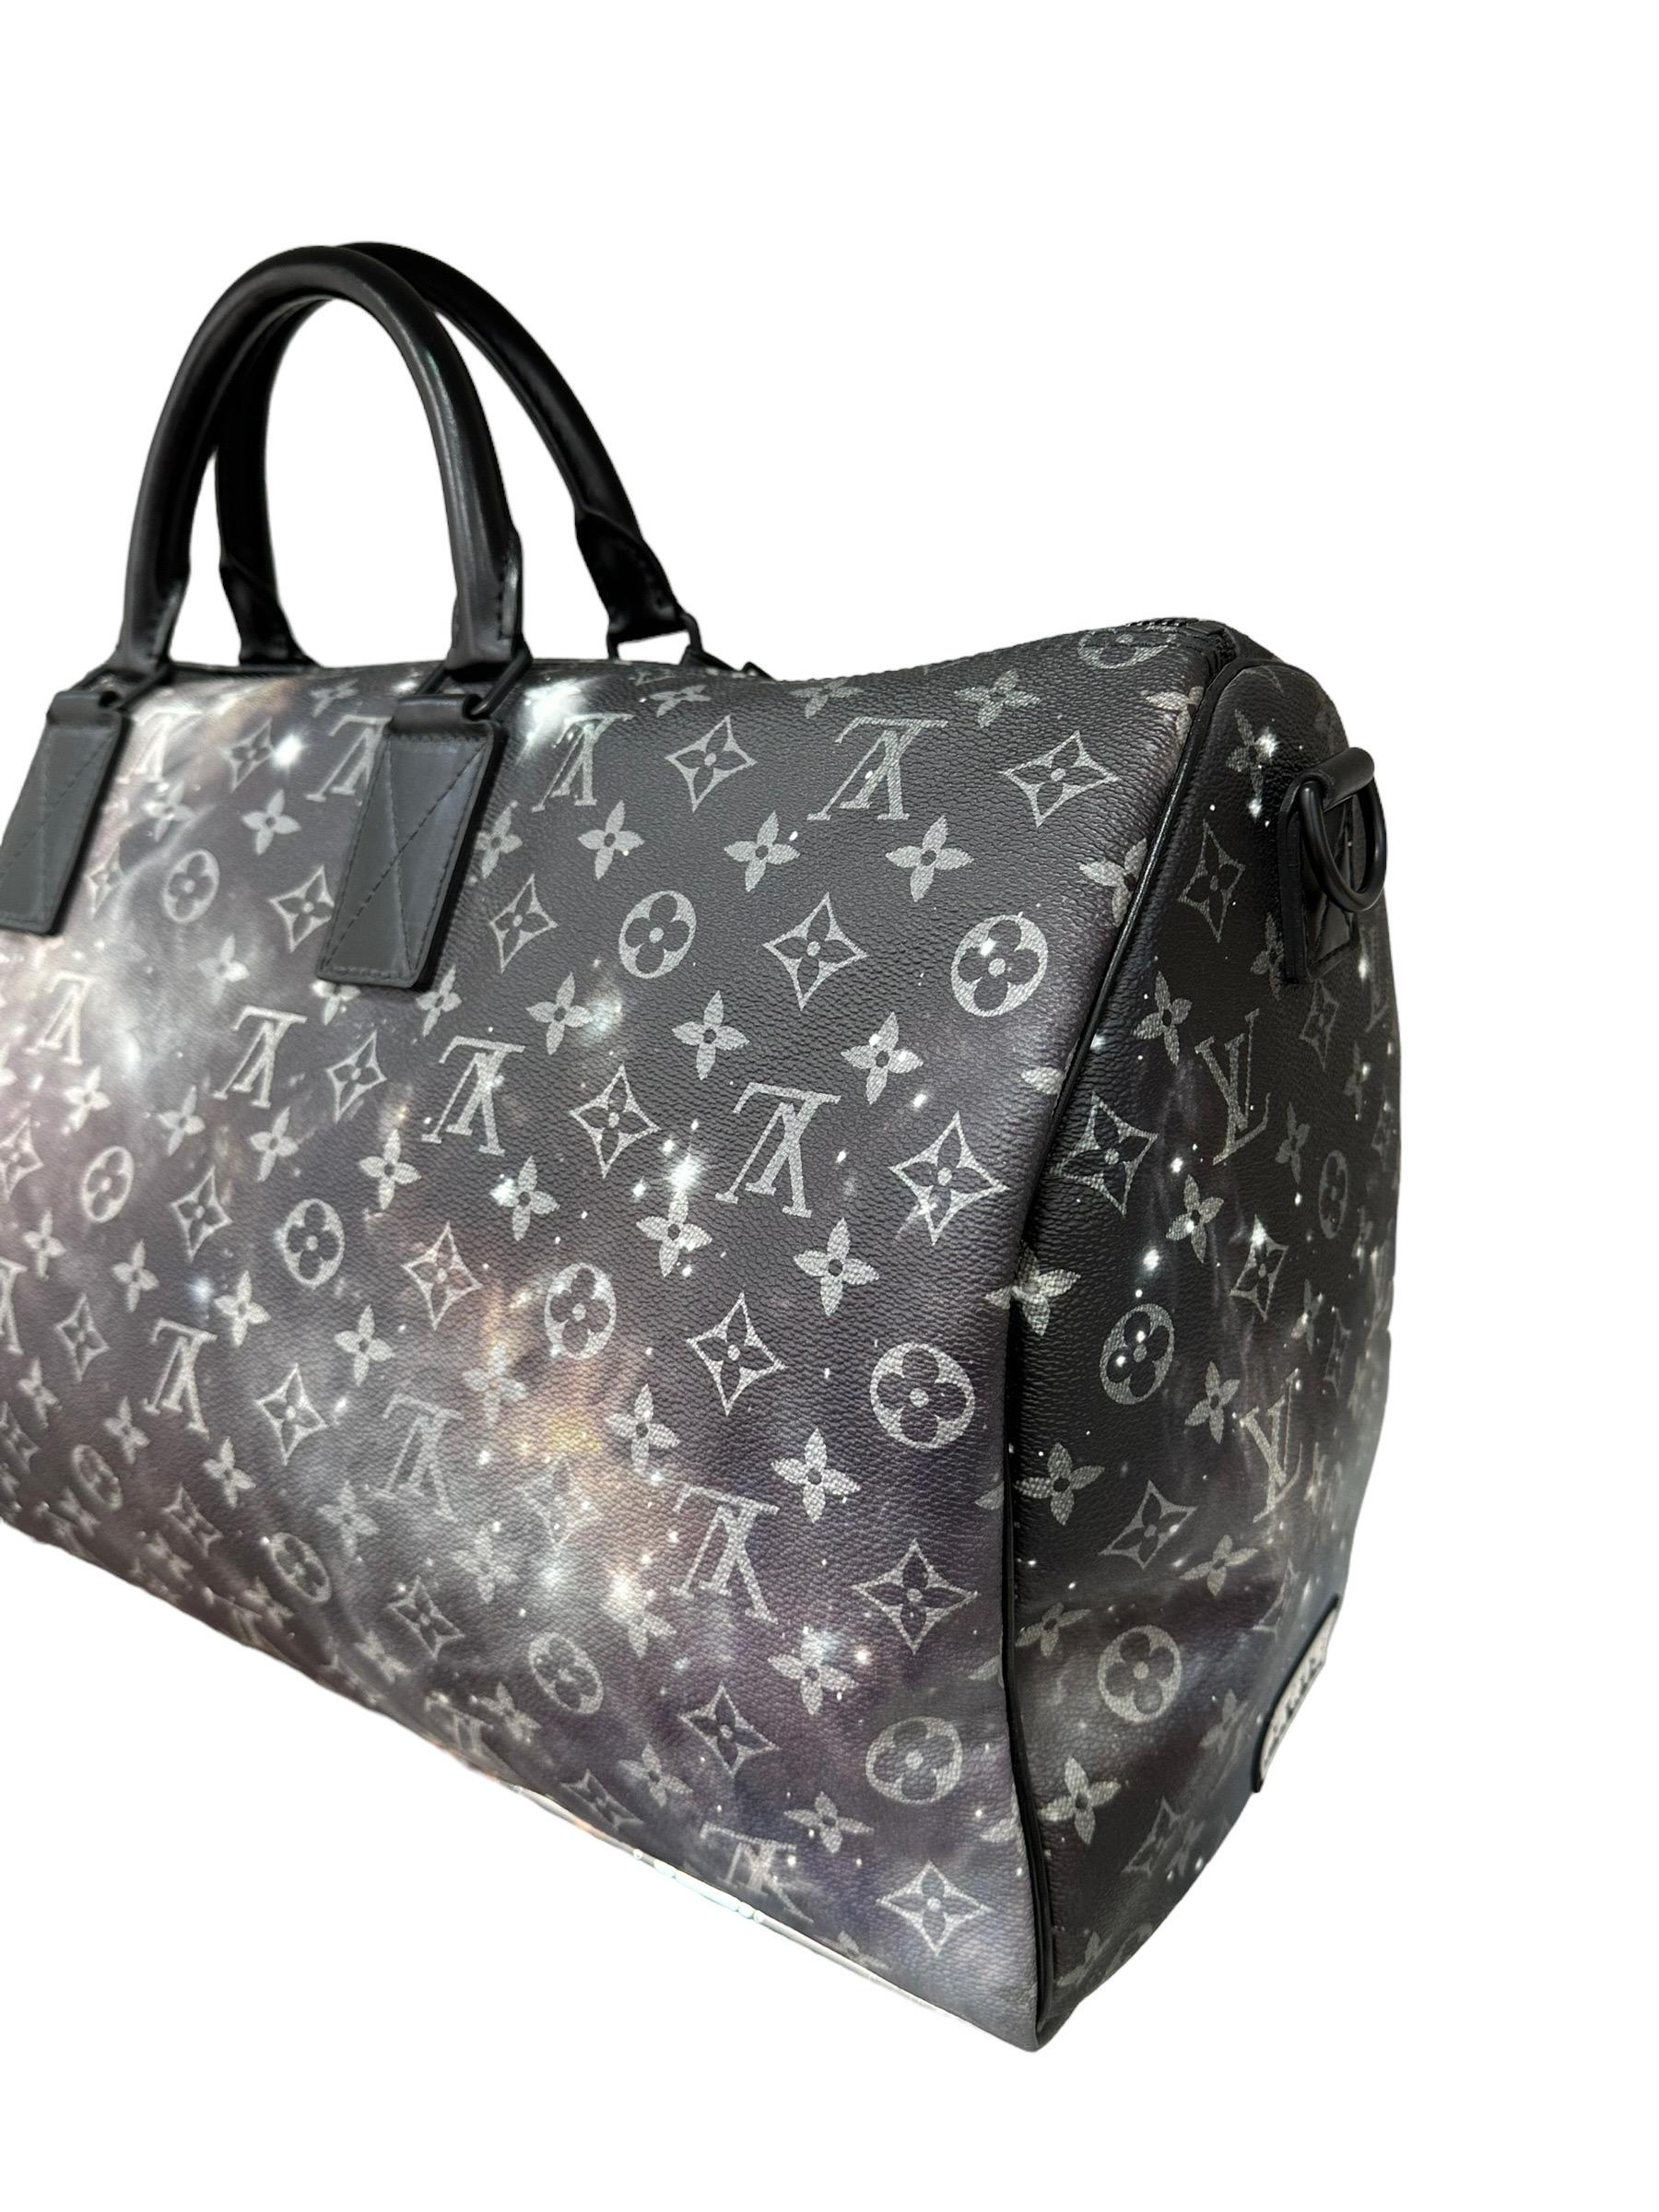 Louis Vuitton Galaxy Keepall Bandouliere 50 Limited Edition Travel Bag For Sale 6